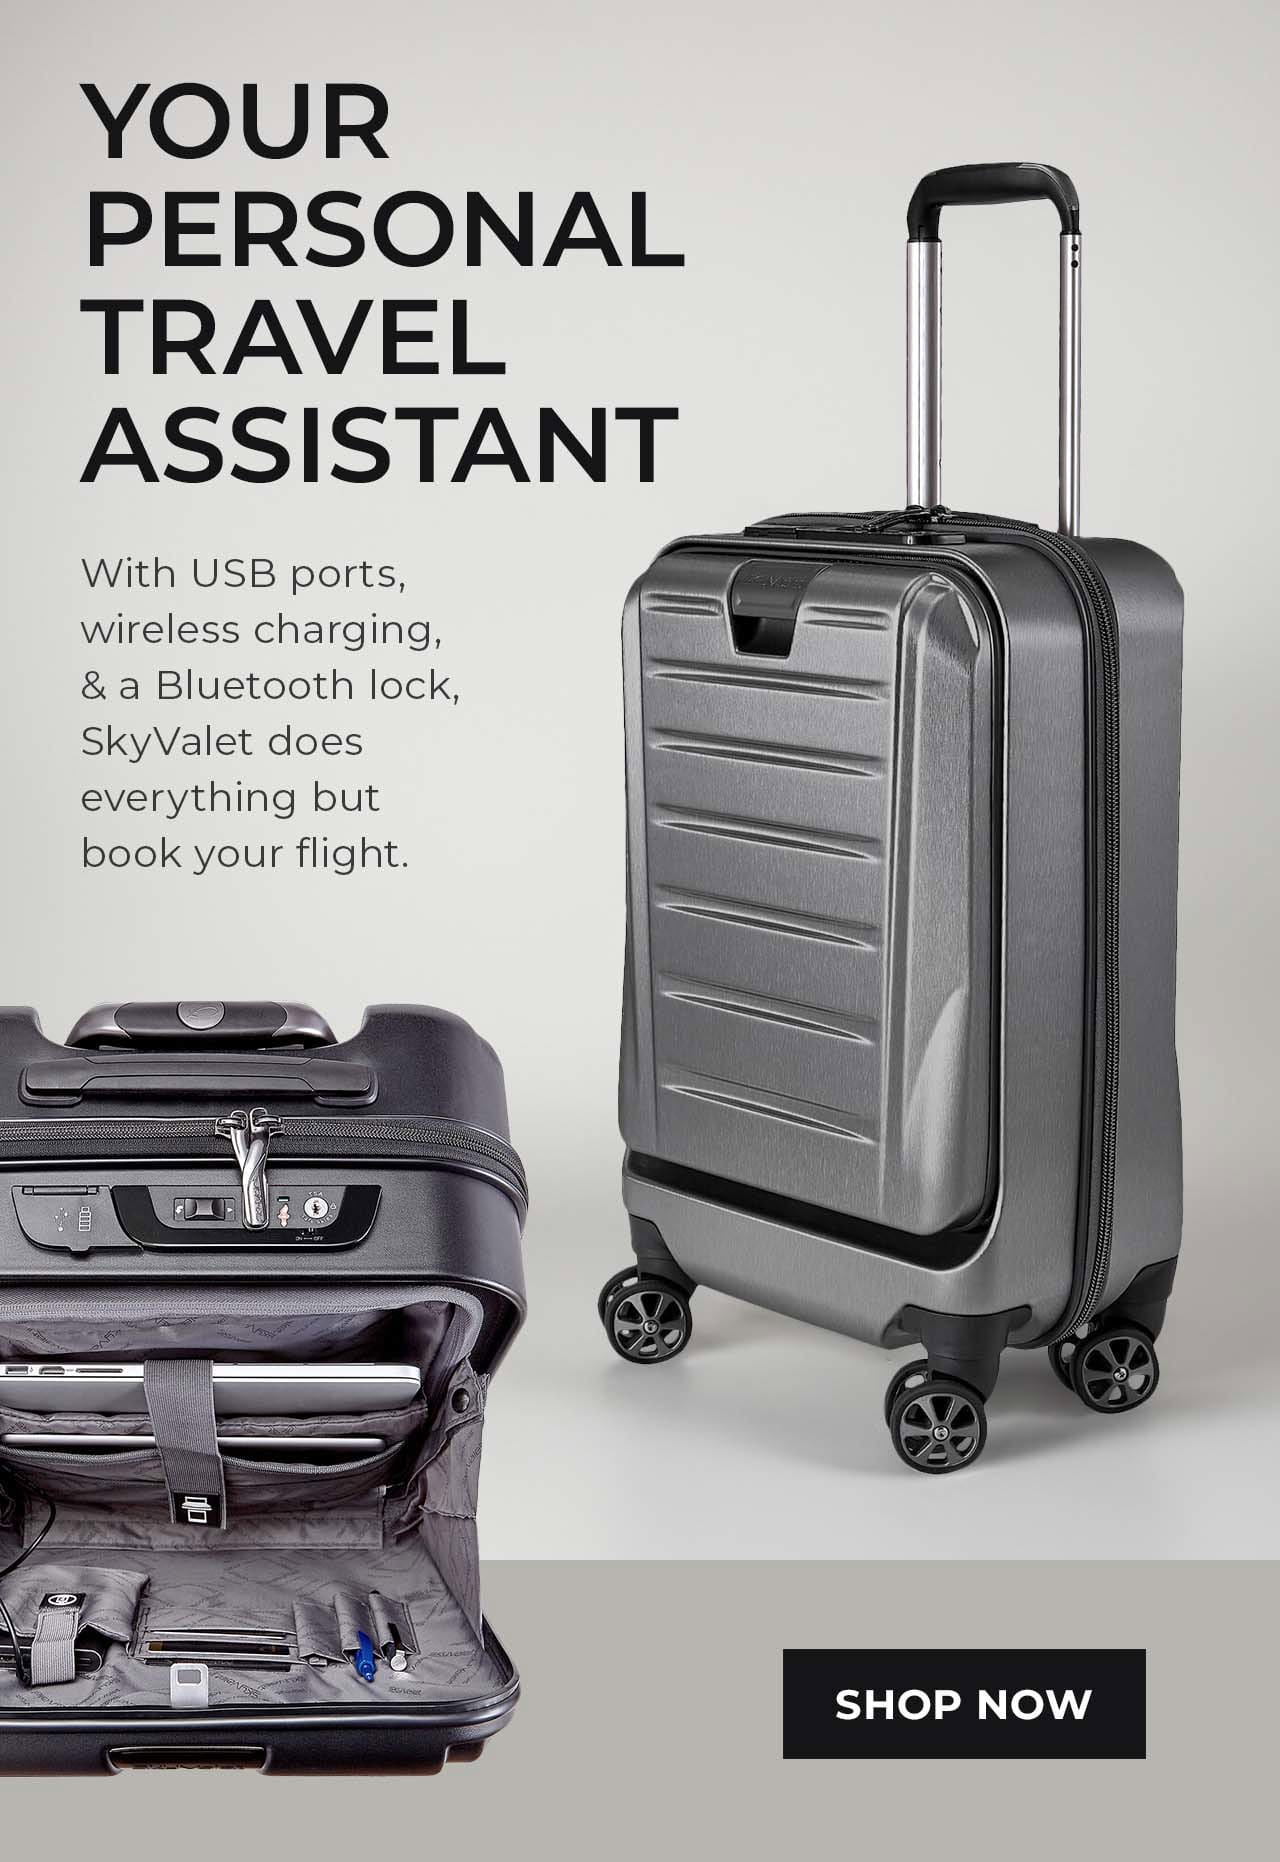 INNOVATIVE SMART LUGGAGE | SHOP NOW